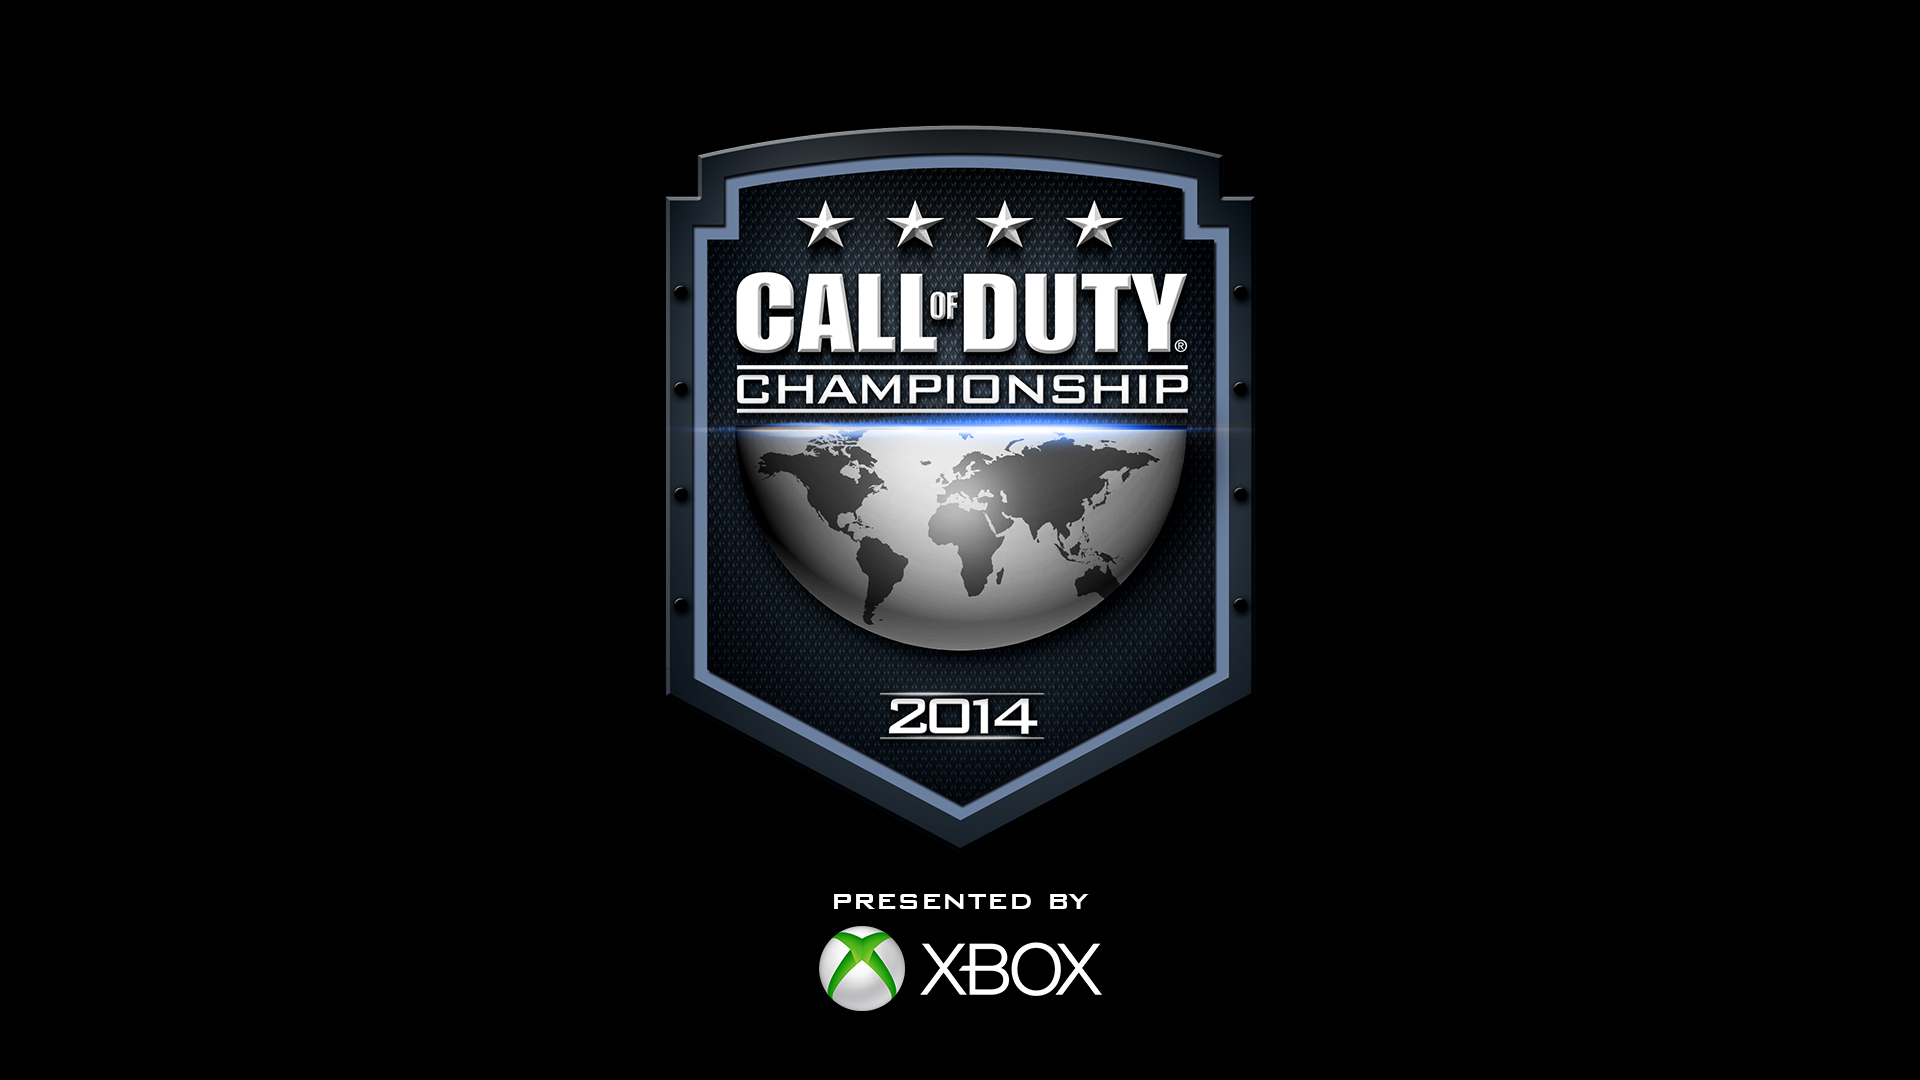 They are the Champions: Die Finalisten der Call of Duty Championship stehen fest